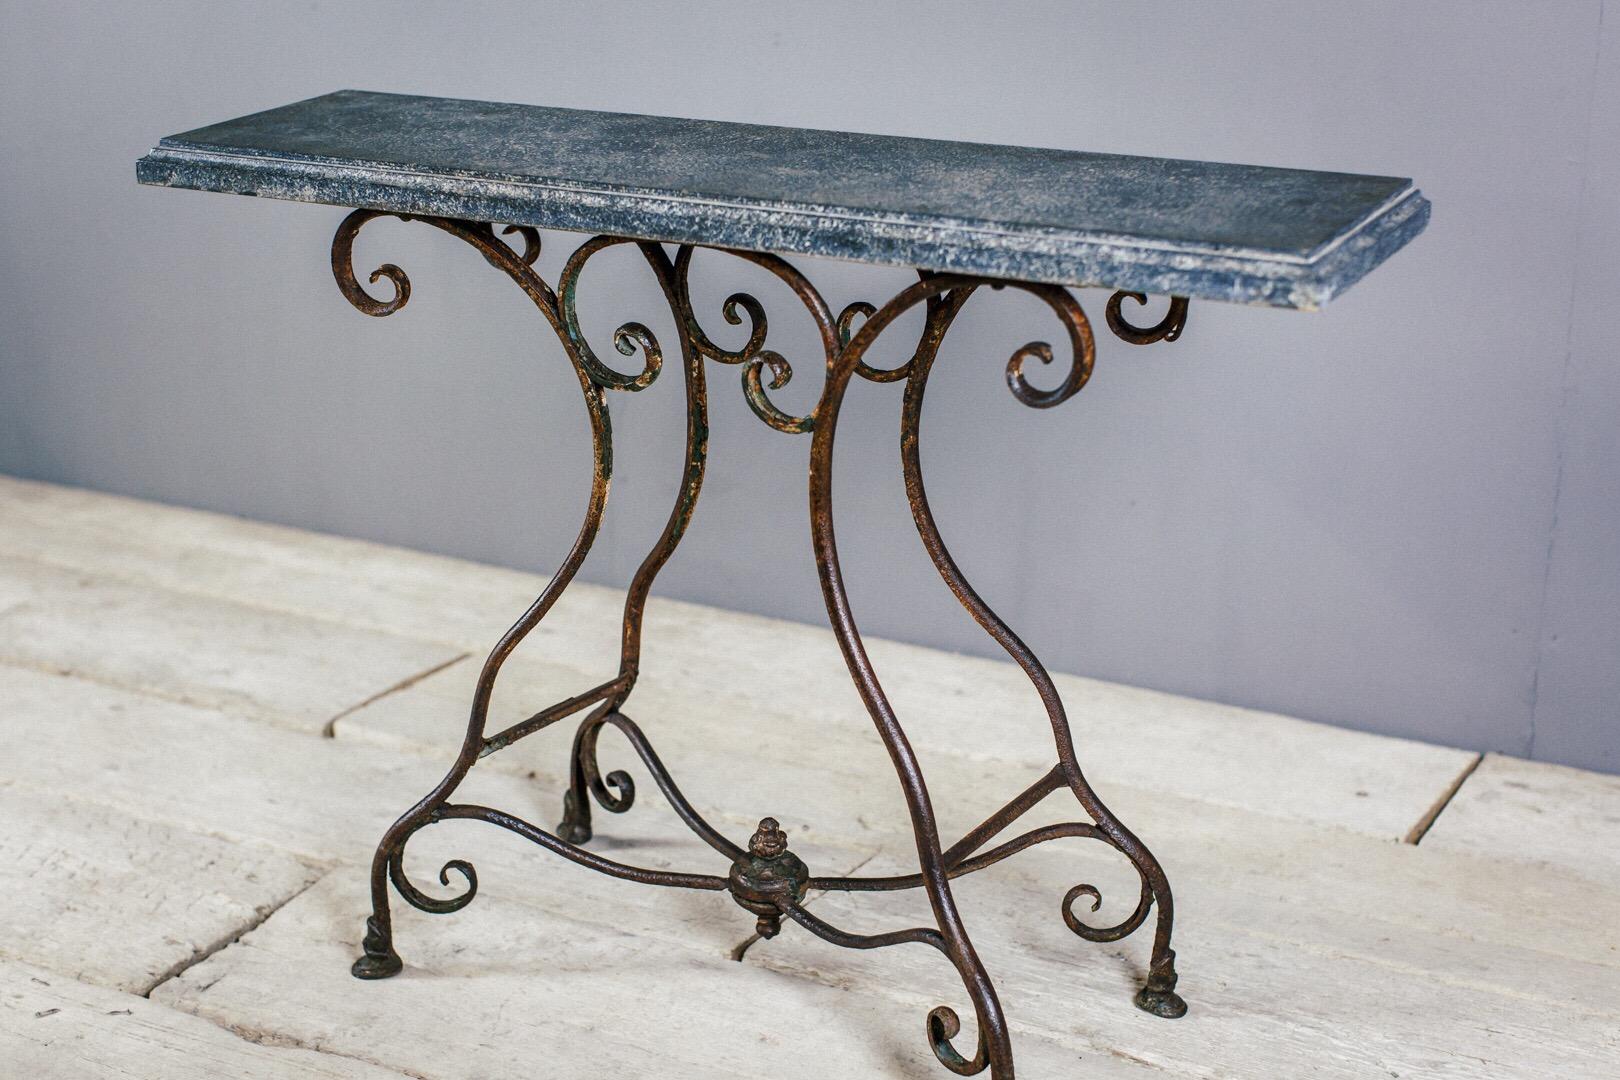 Wrought and cast iron Arras Foundry jardinière base, with original makers mark and original distressed finish. Combined with a later faux slate painted timber top, making a wonderful console table.

   